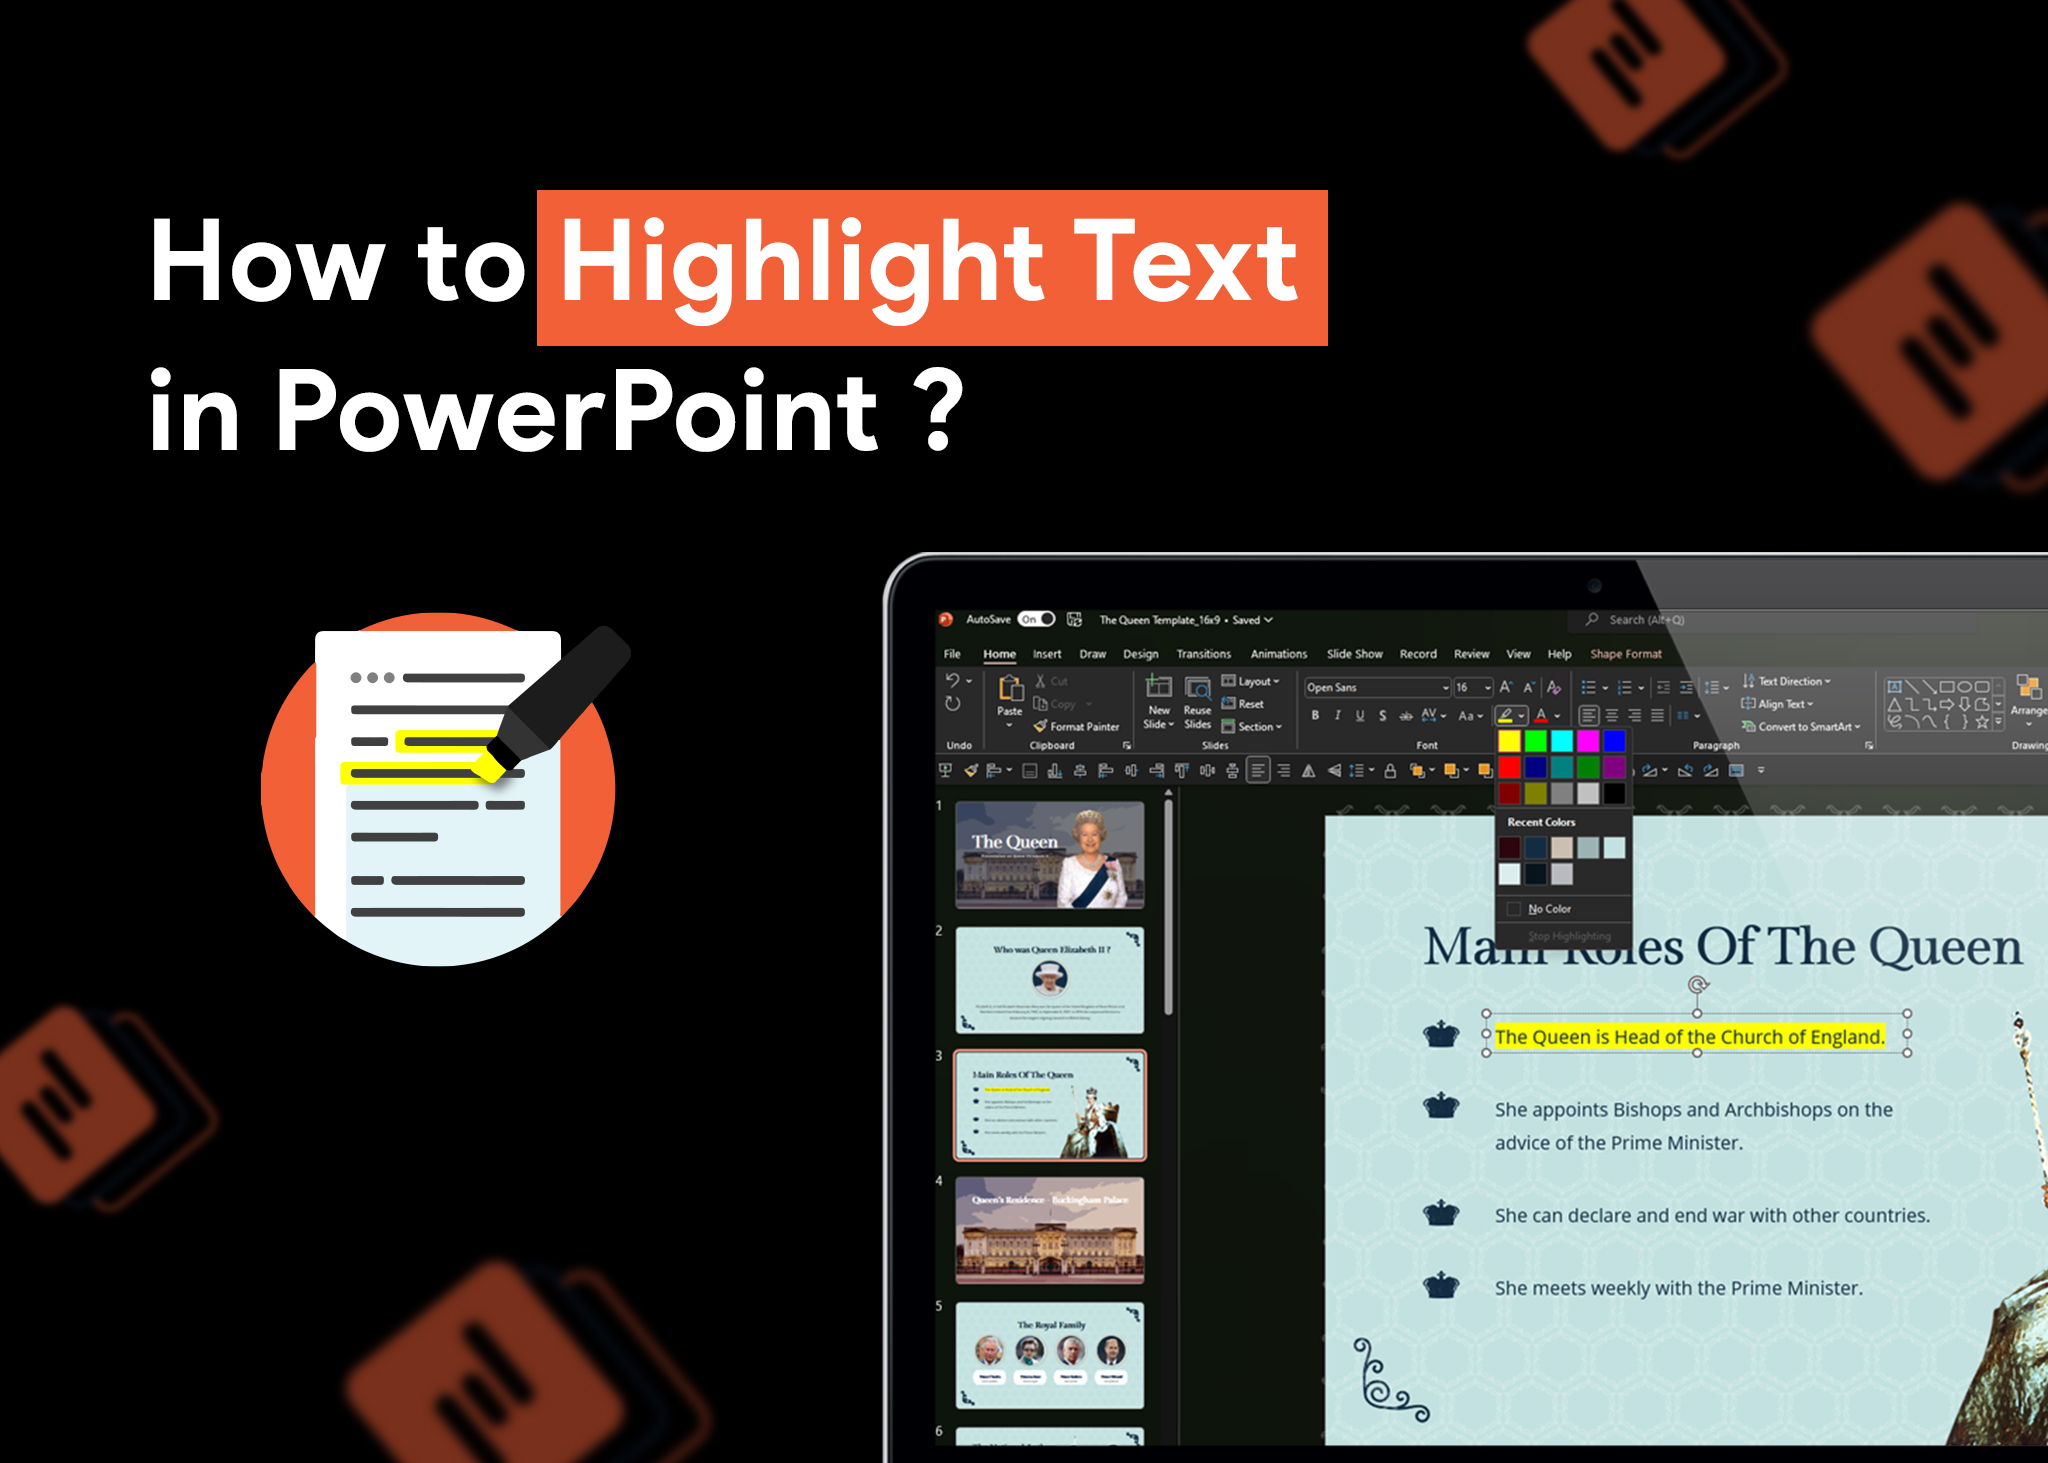 how to highlight text in PowerPoint